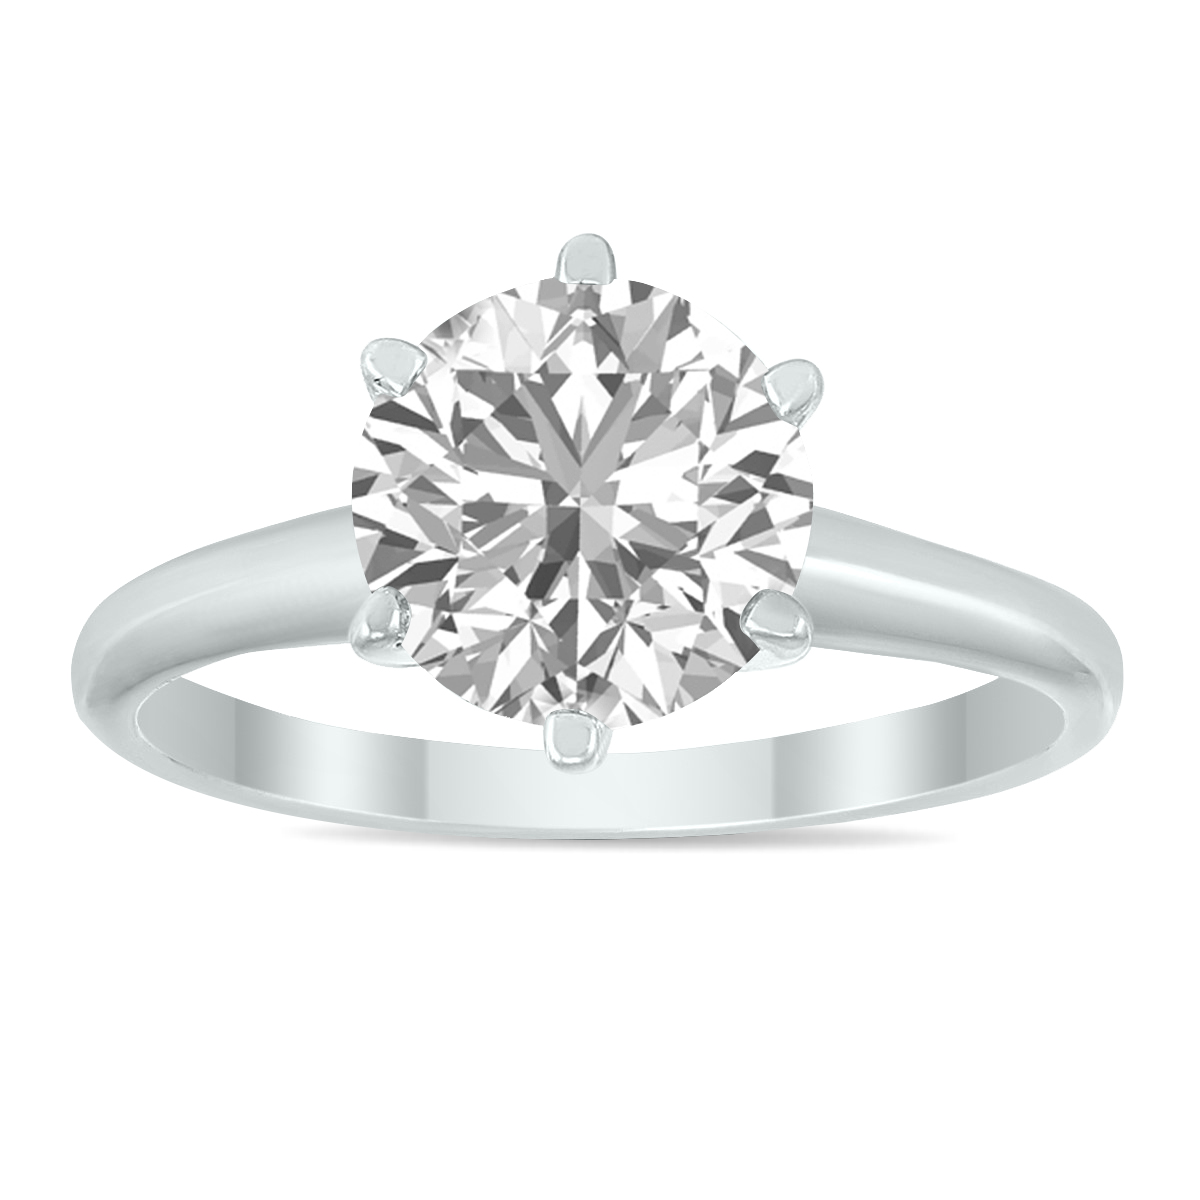 Image of IGI Certified Lab Grown 1 1/4 Carat Diamond Solitaire Ring in 14K White Gold (J Color SI2 Clarity)